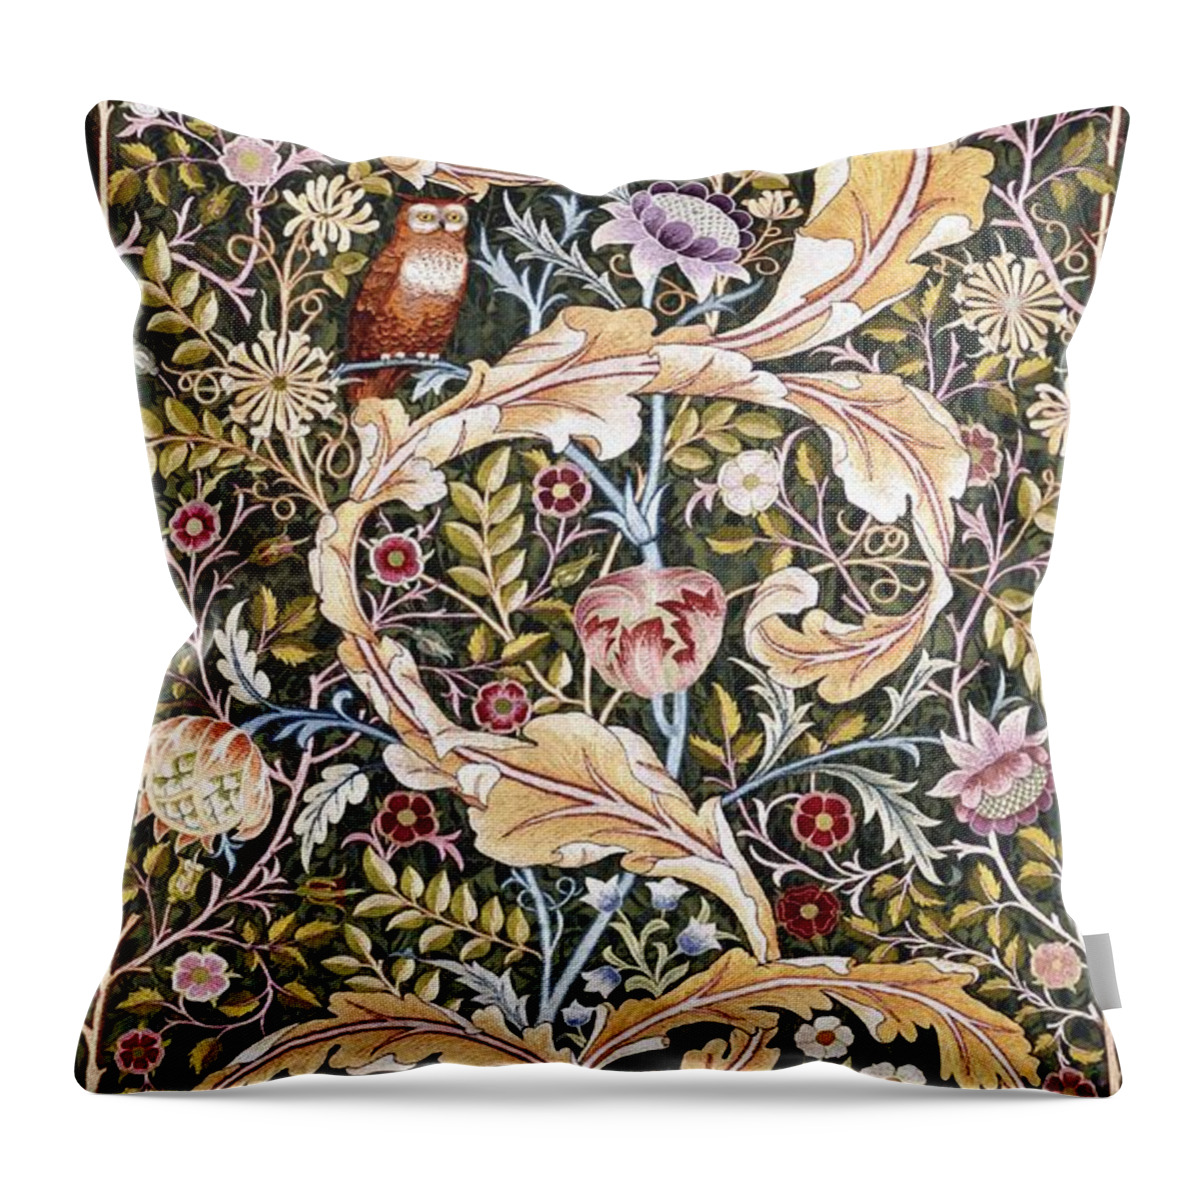 William Morris Throw Pillow featuring the painting Owl by William Morris